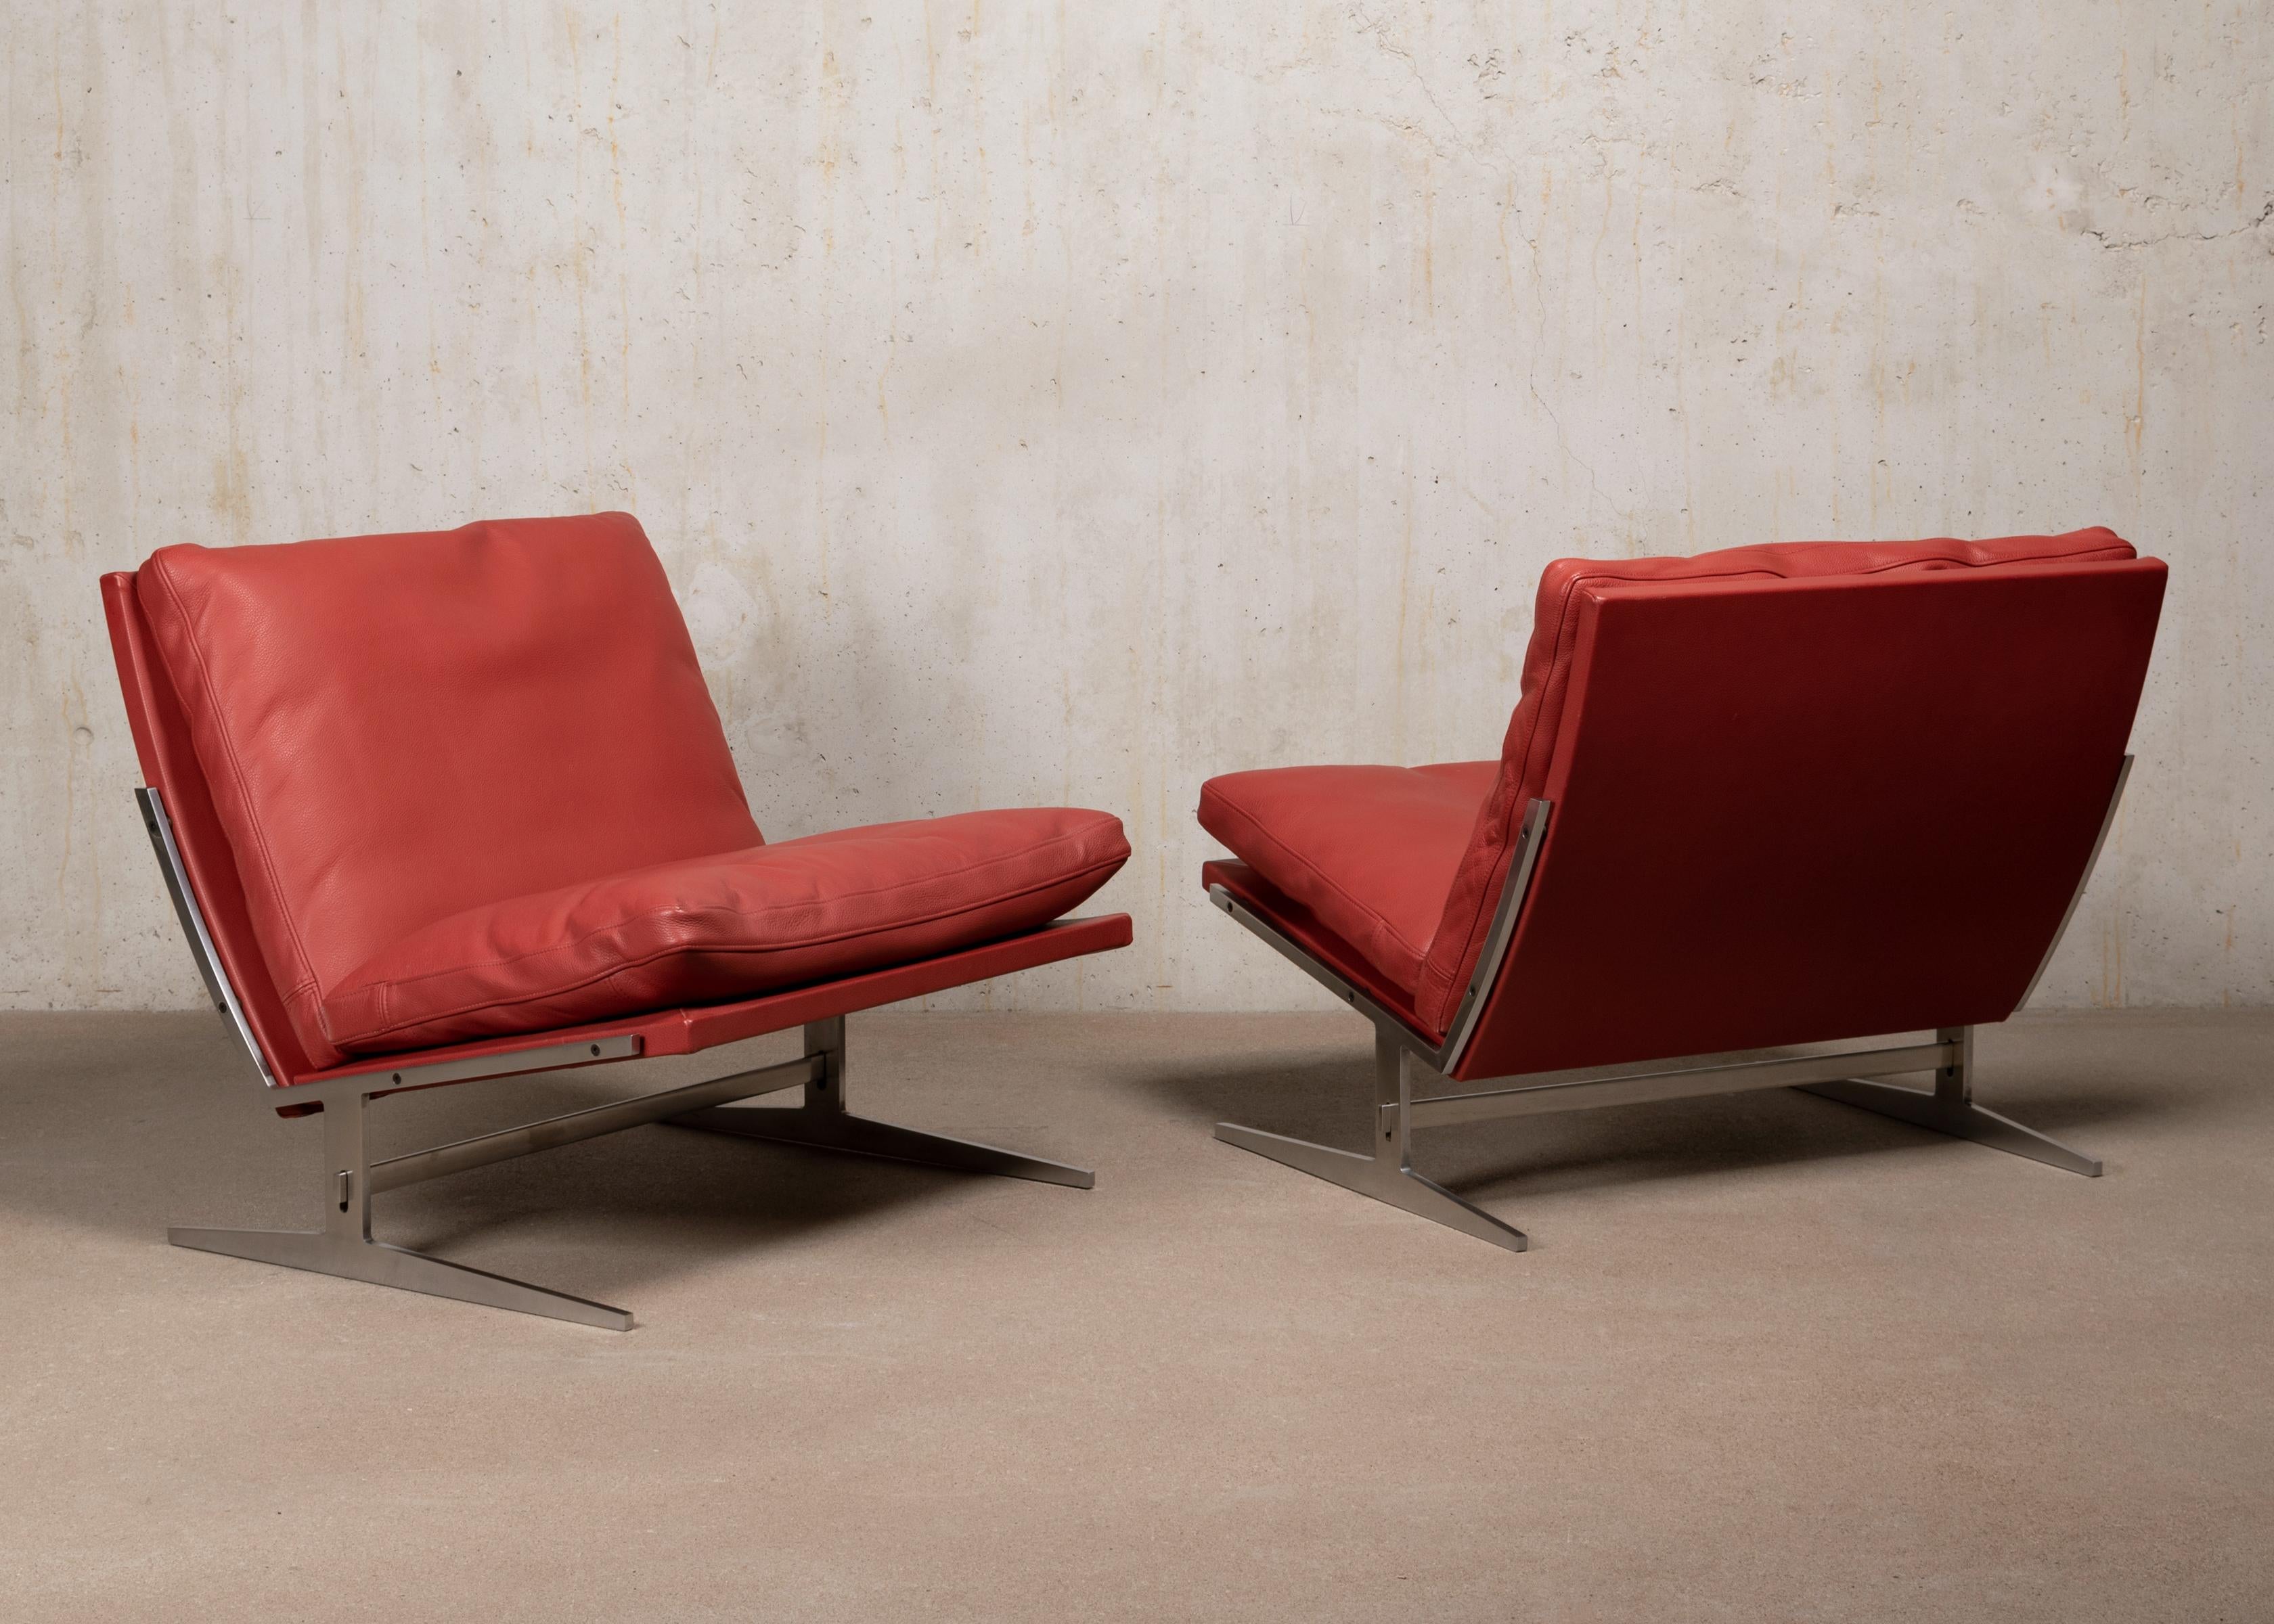 Beautiful pair slipper lounge chairs by Jørgen Kastholm & Preben Fabricius model Bo-561 produced by Bo-Ex in Denmark. Polished steel frame and recent Ruby Red leather upholstery with down feathers filled cushions all in very good condition with only